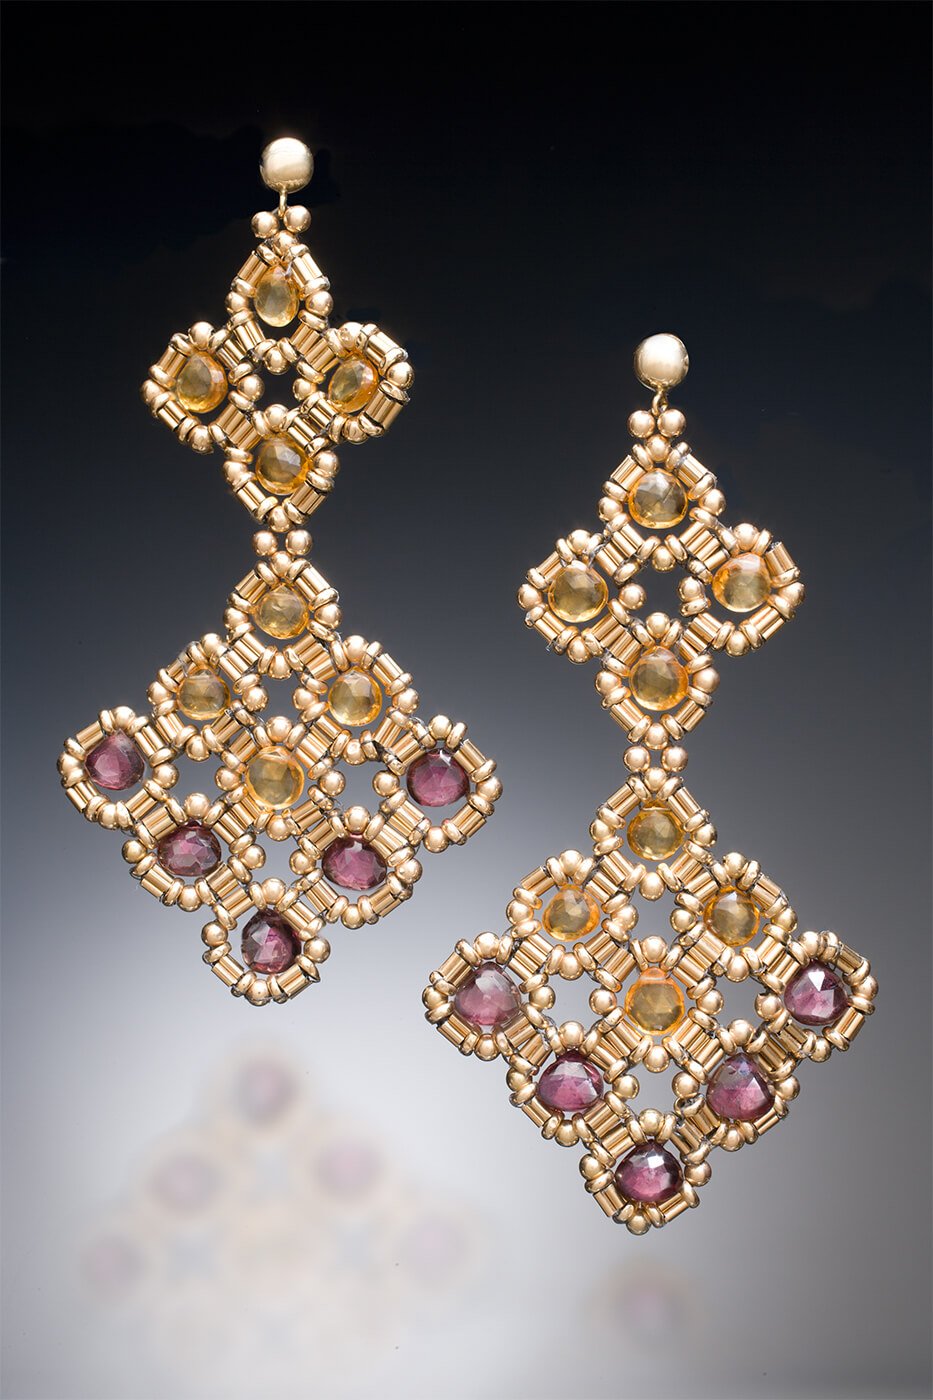 Chandelier Earrings. These long earrings are hand woven with 14k gold, citrine, and garnet beads.